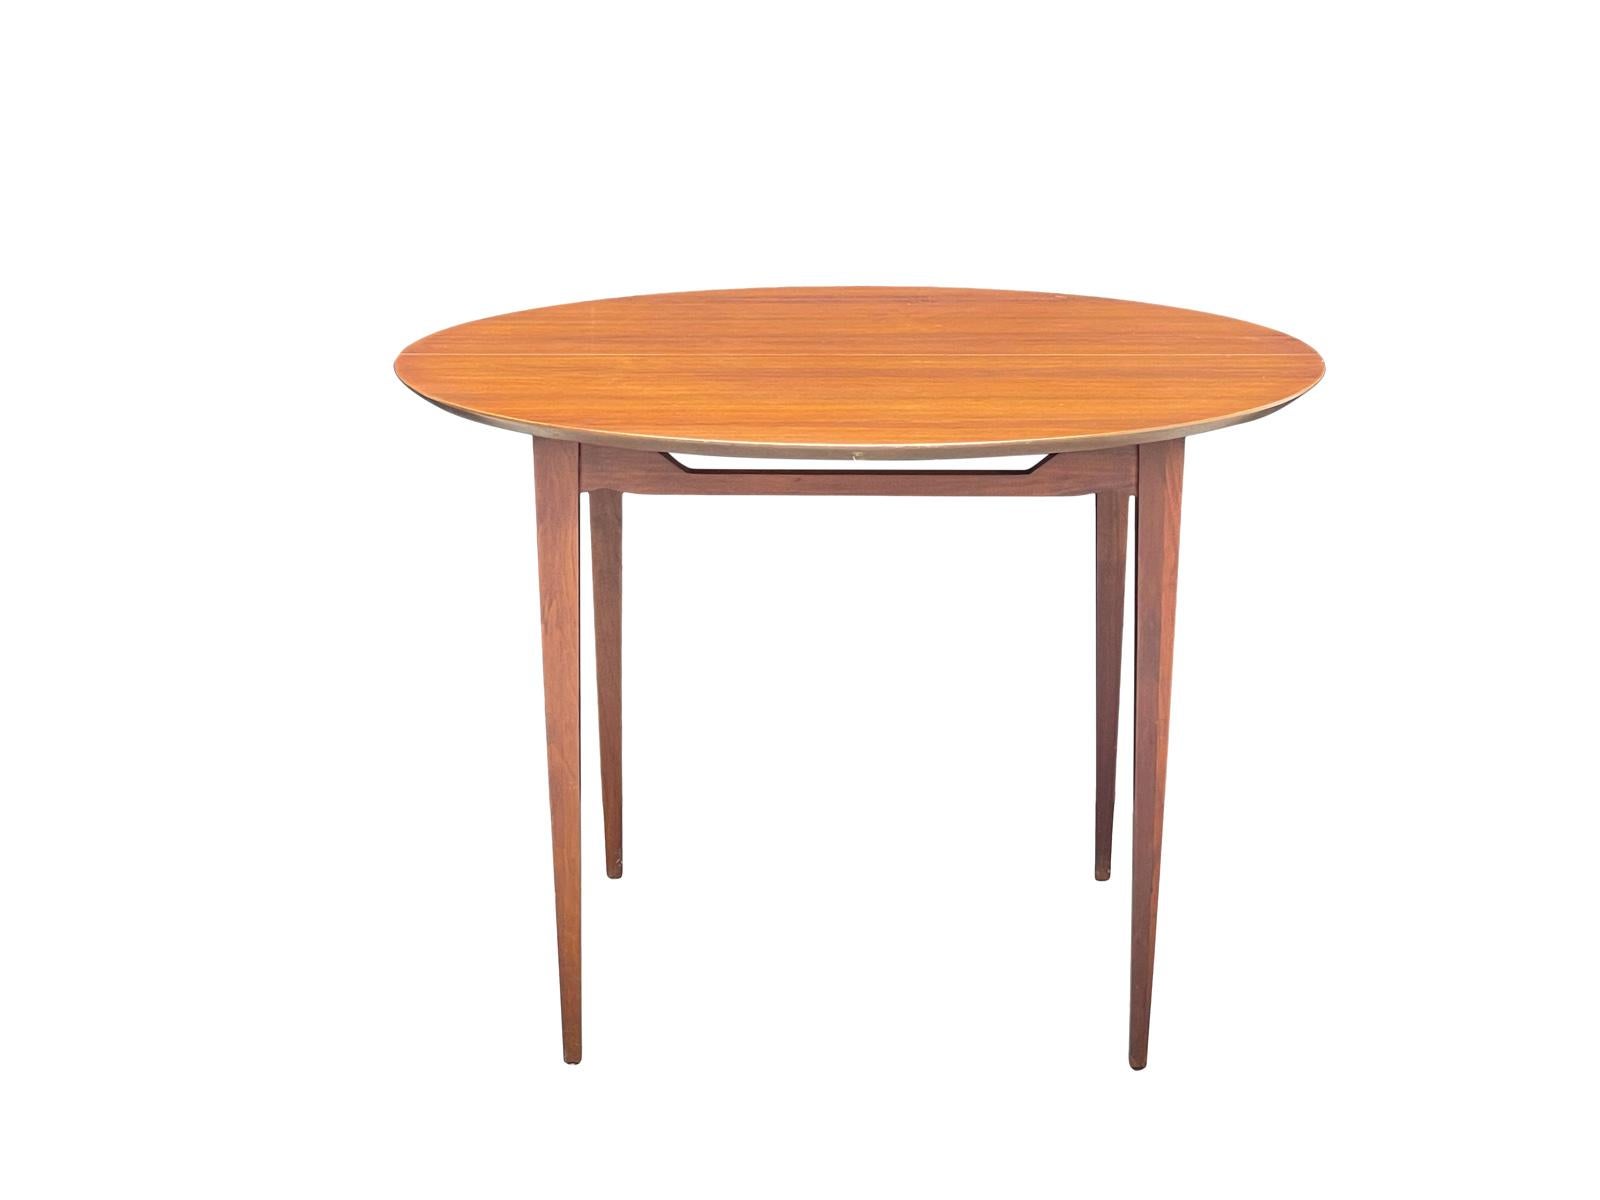 American 1960s Walnut Round Tapered Extending Dining Table